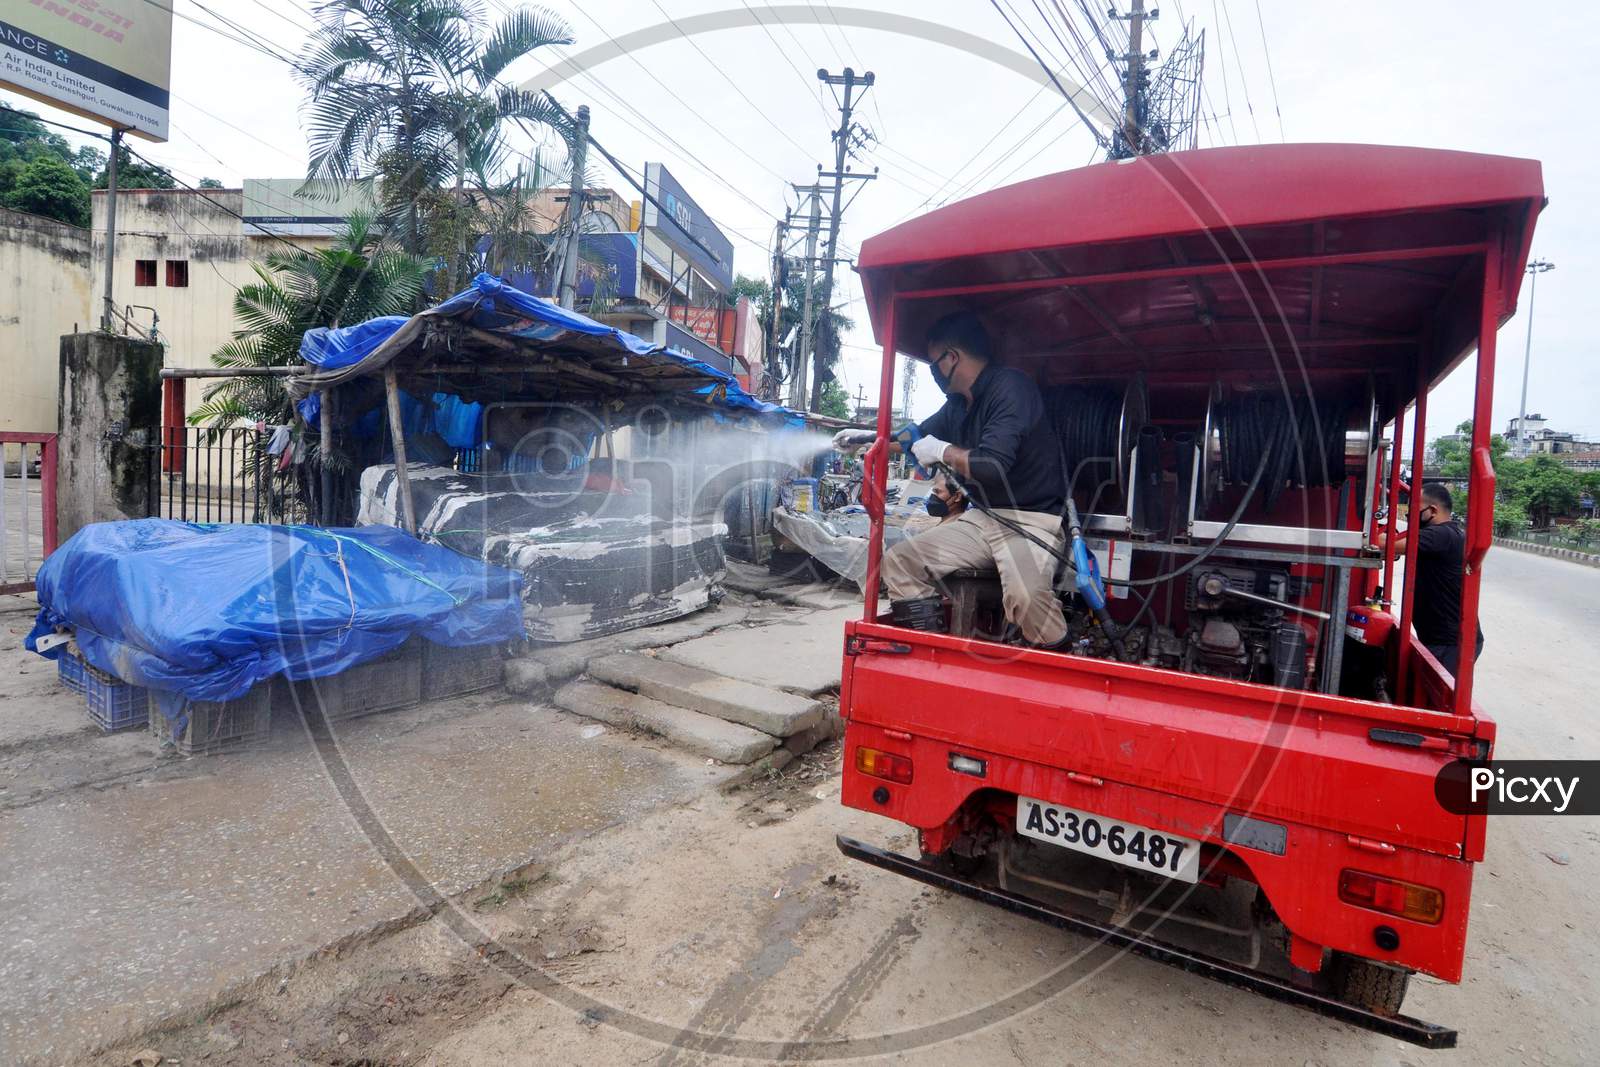 Firefighters spray disinfectant in a local market area during lockdown in Guwahati, Assam on July 2, 2020